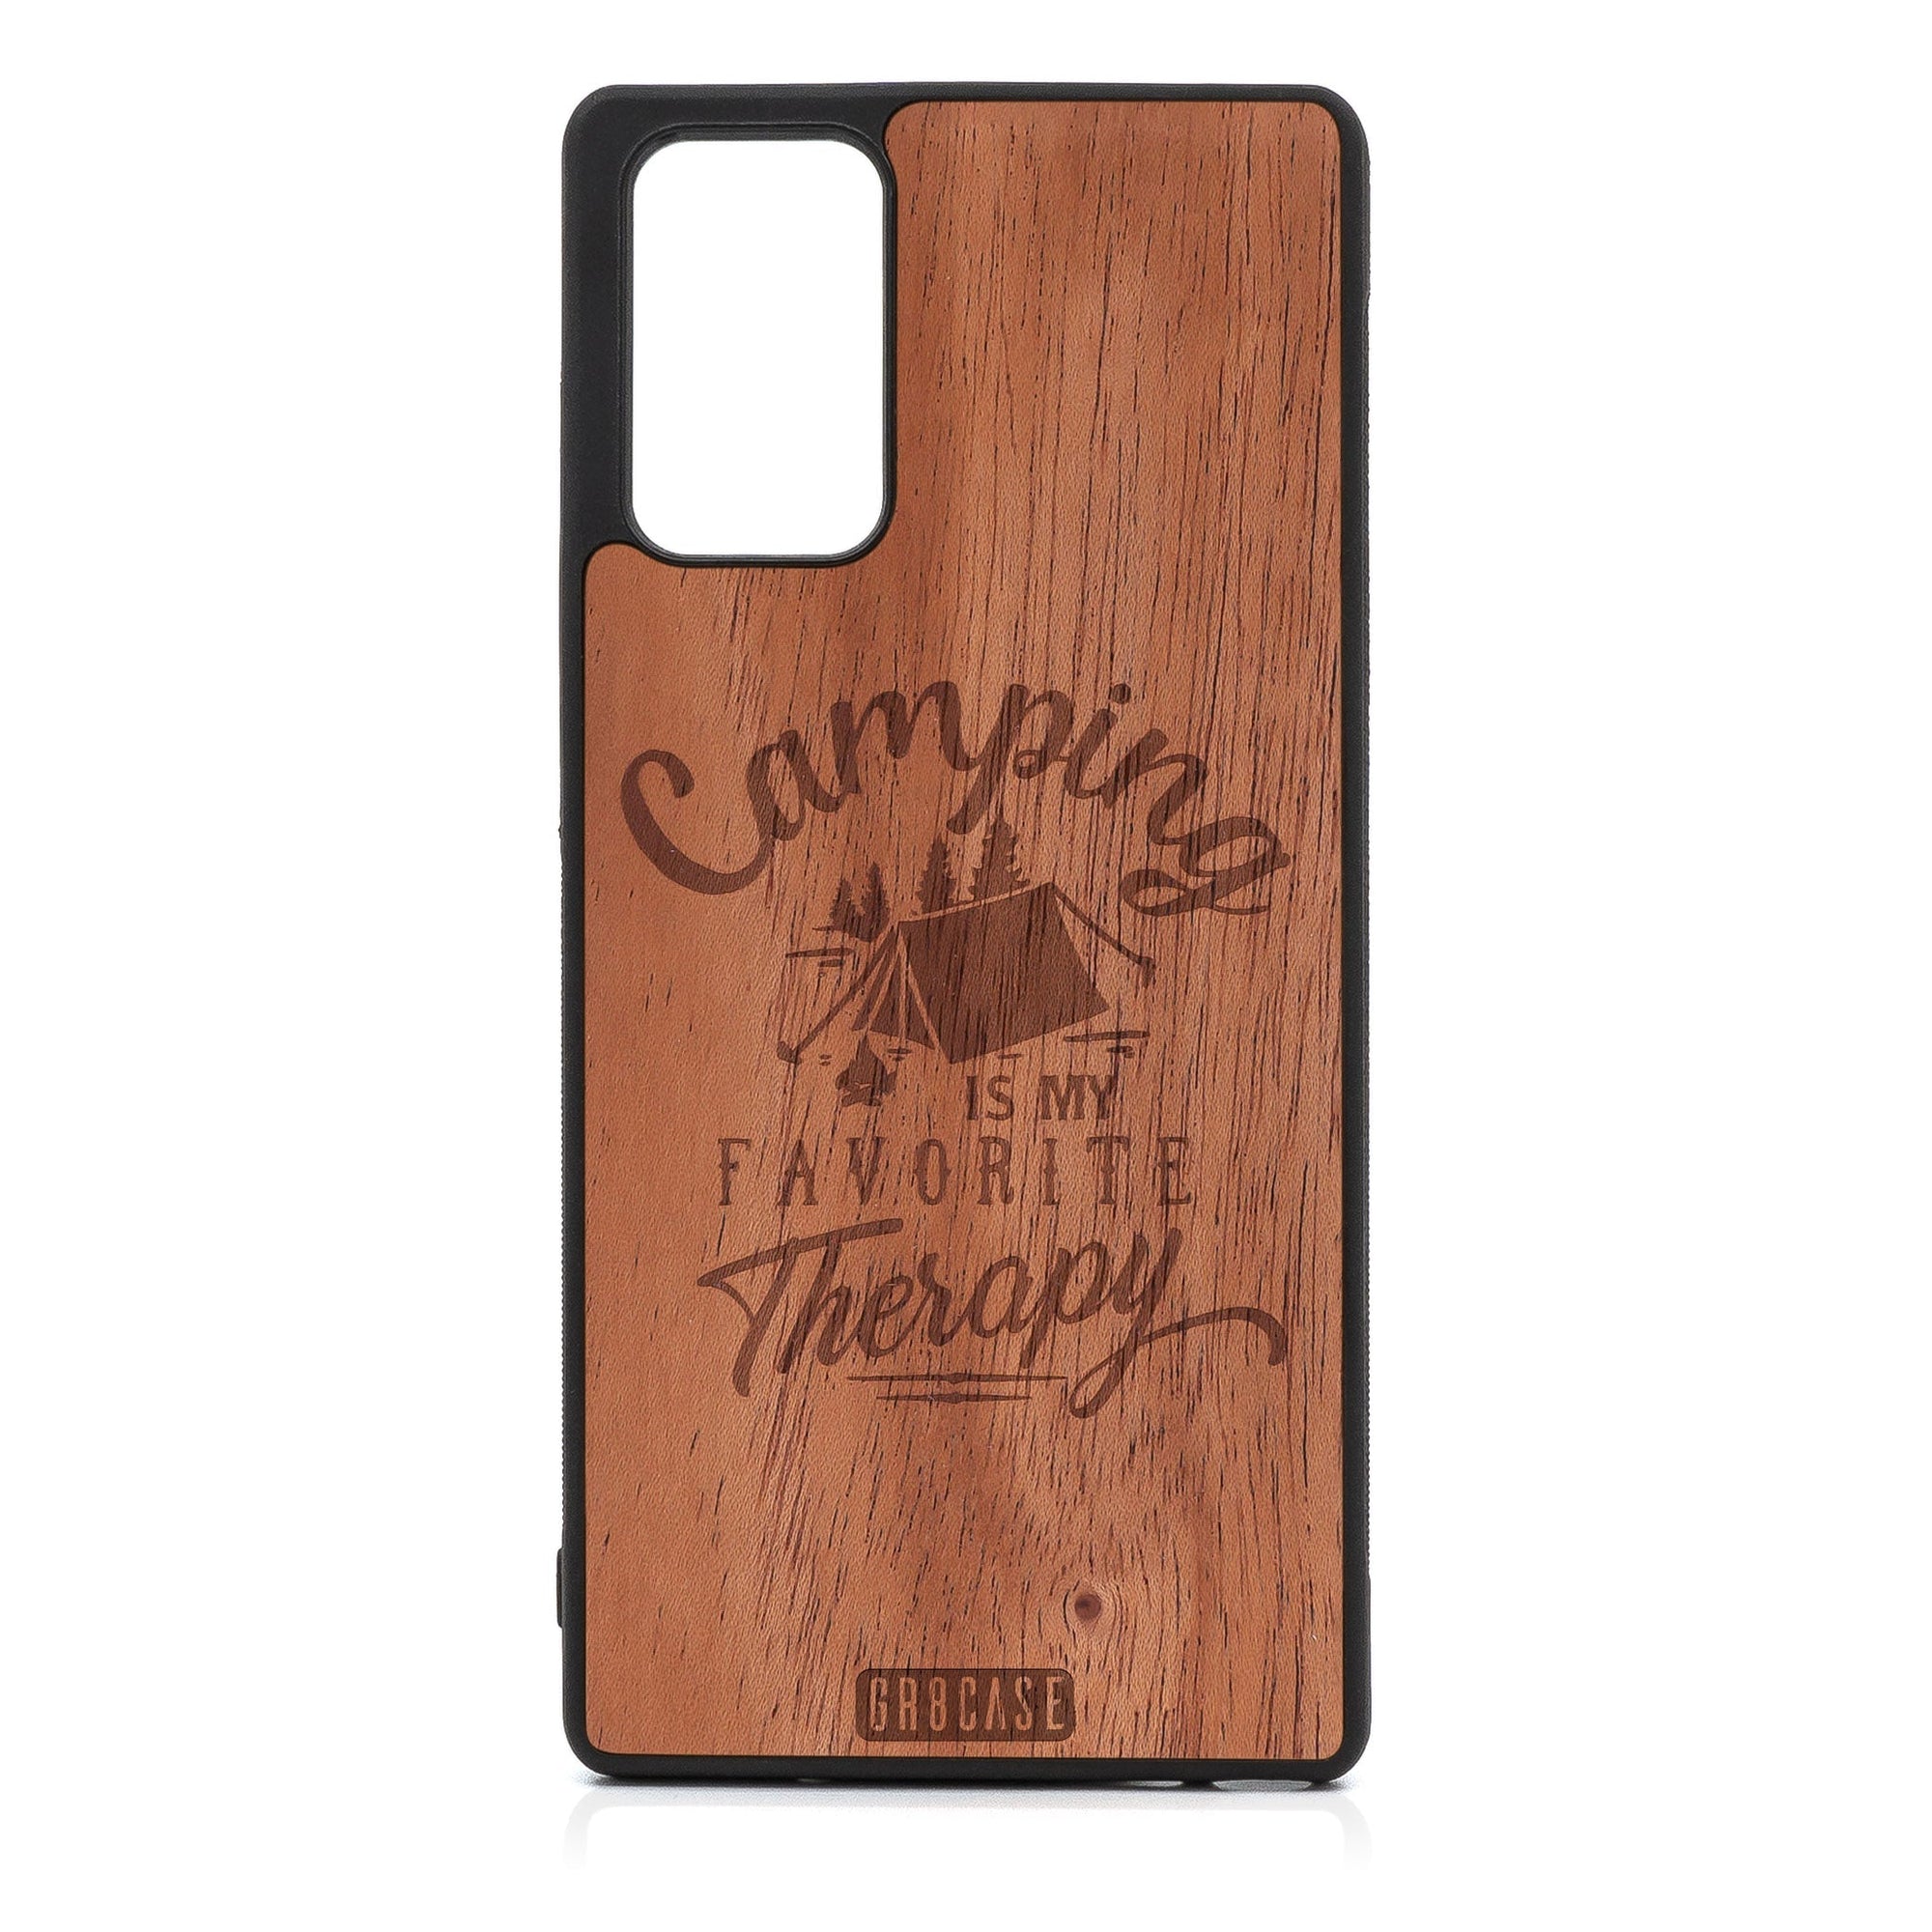 Camping Is My Favorite Therapy Design Wood Case For Samsung Galaxy A71 5G